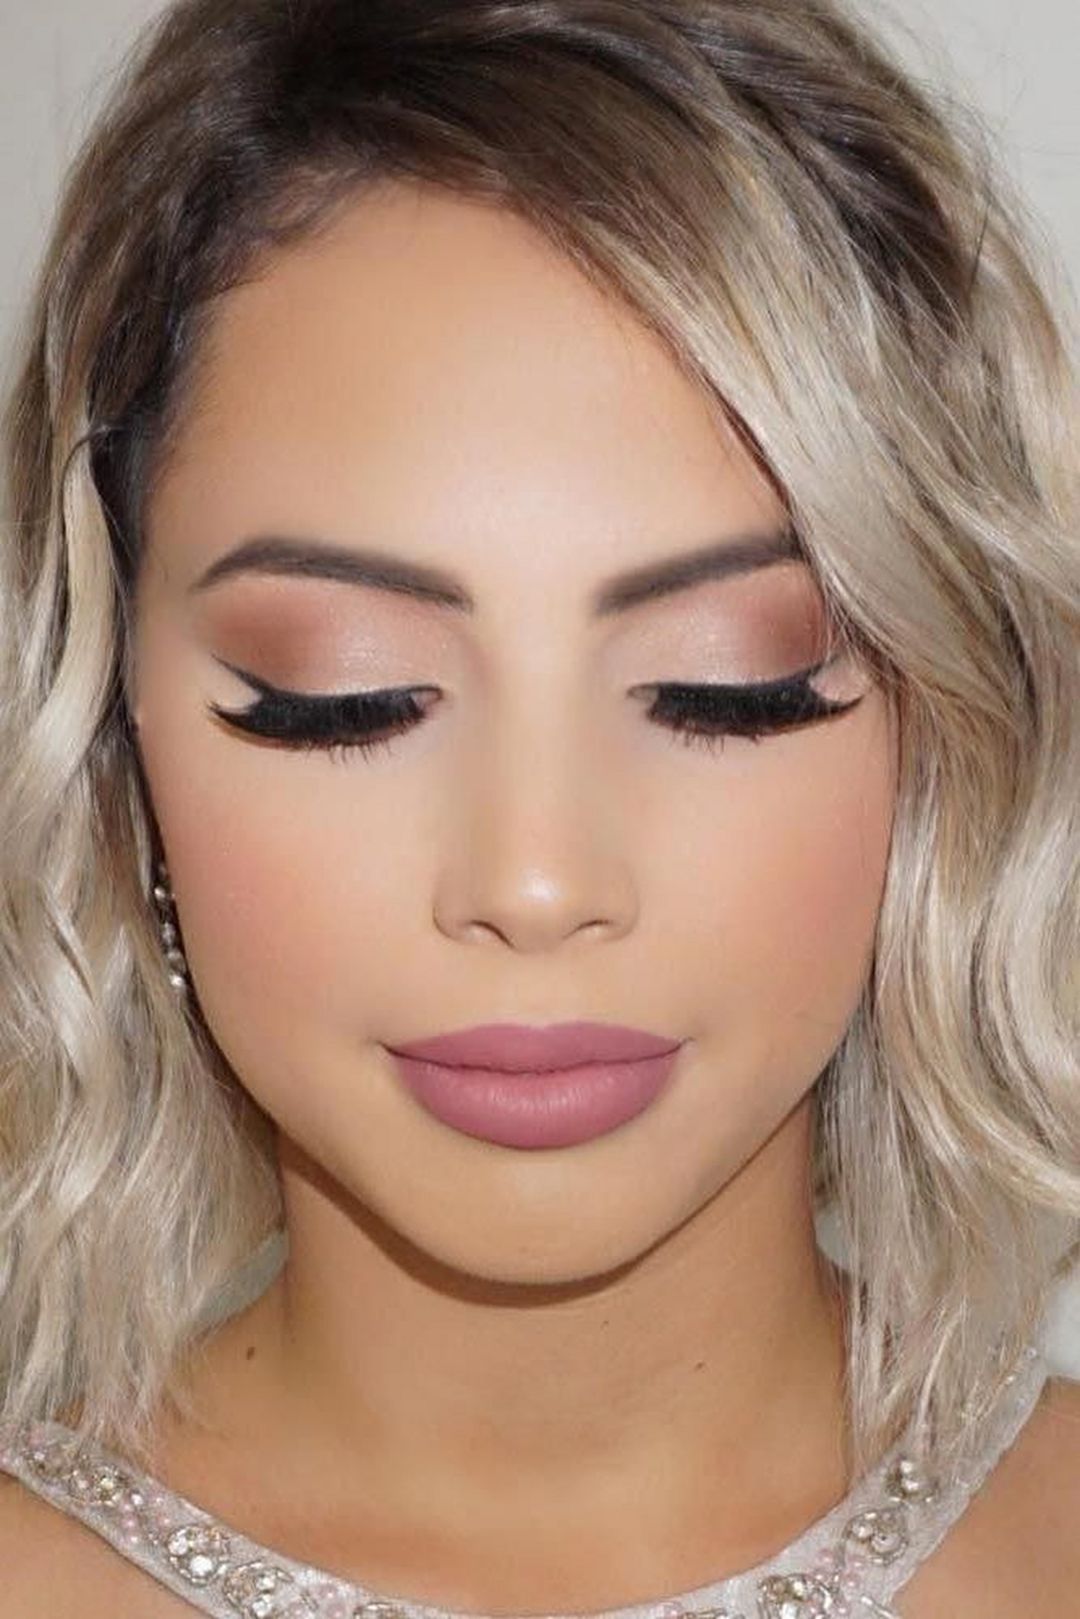 15 Simple And Memorable Makeup Ideas You Can Rely On For Parties - Fashions Nowadays -   15 makeup party ideas